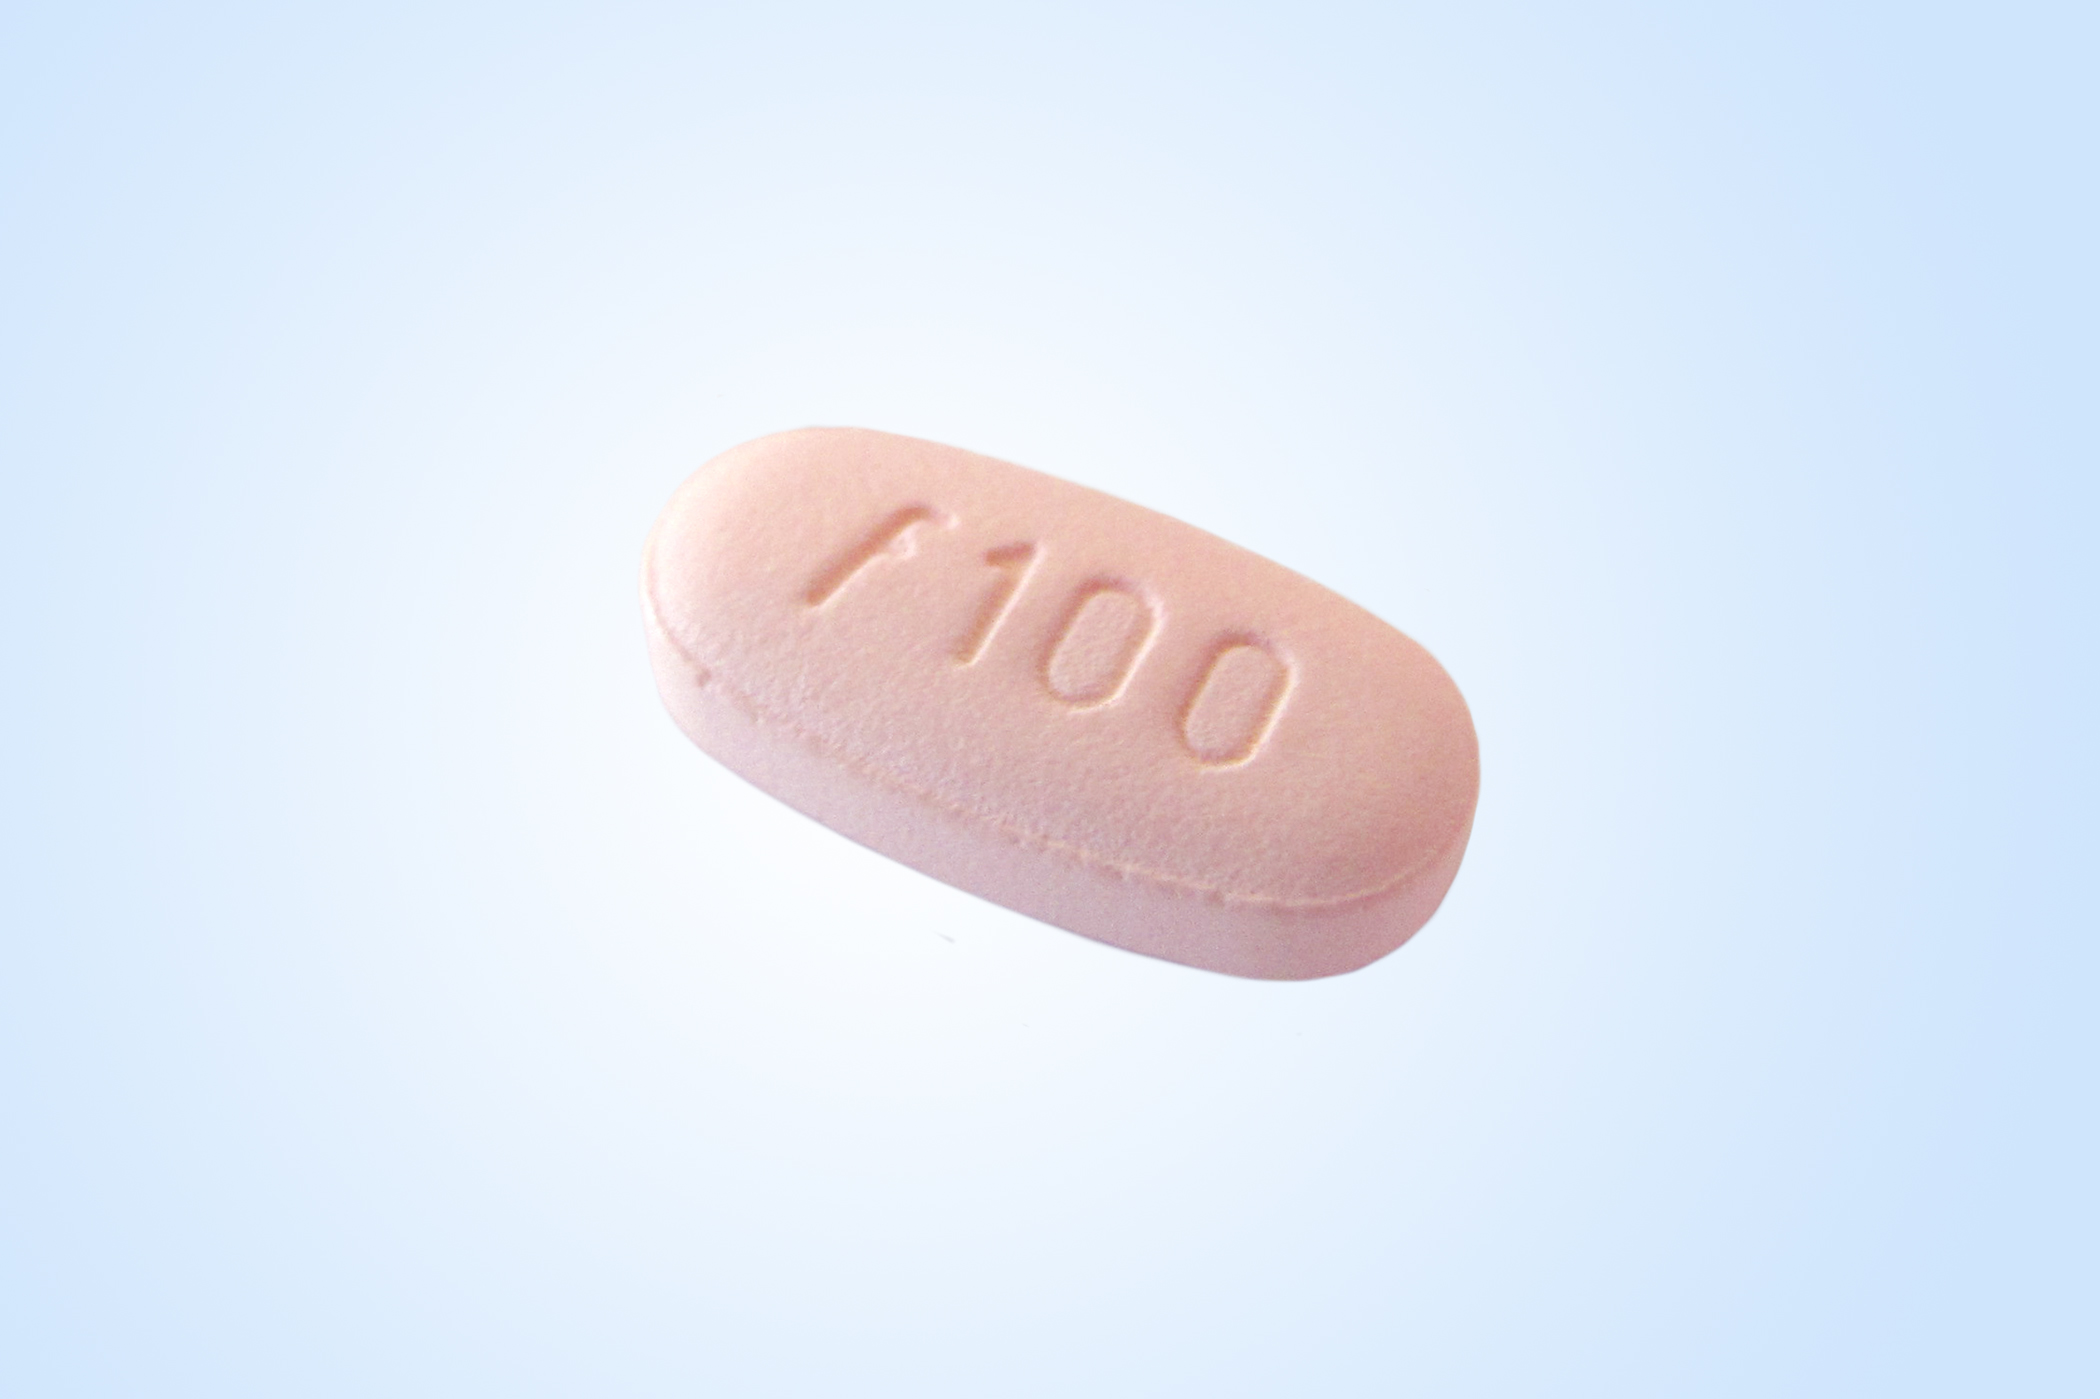 What You'll Have to Pay for 'Female Viagra'